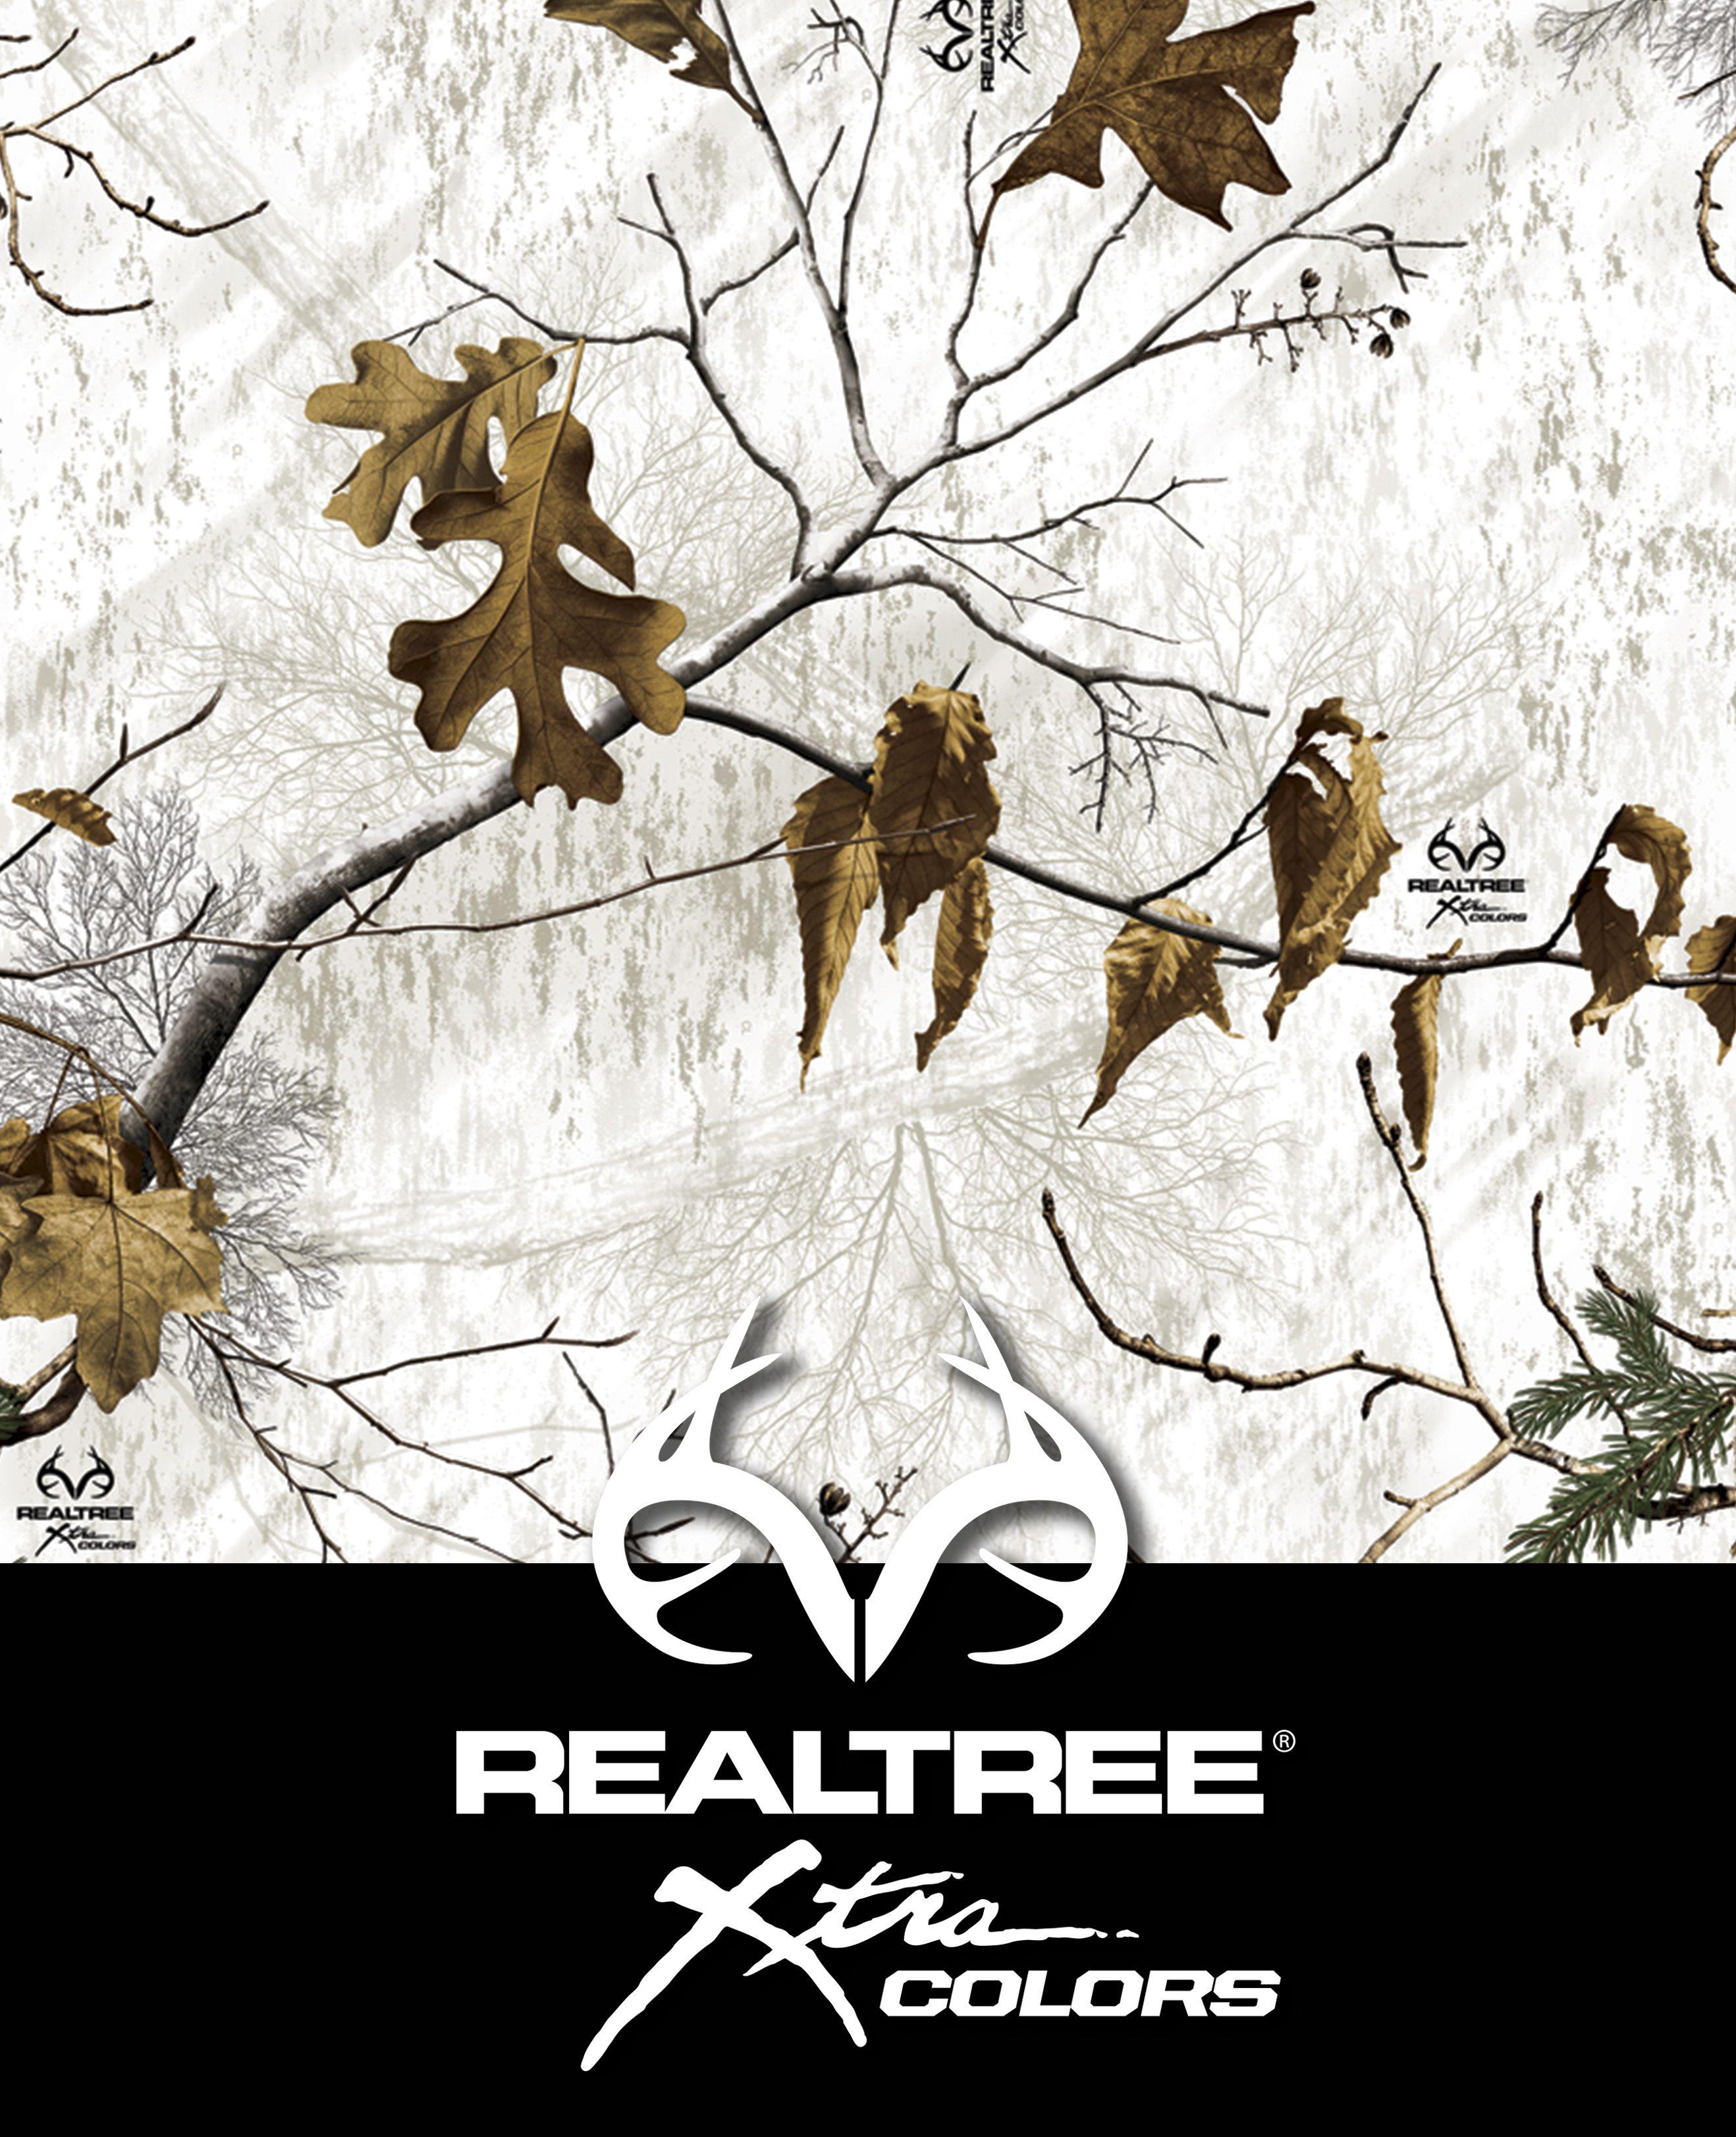 Camouflage Patterns. Realtree Camo Patterns, Decals. Camowraps®